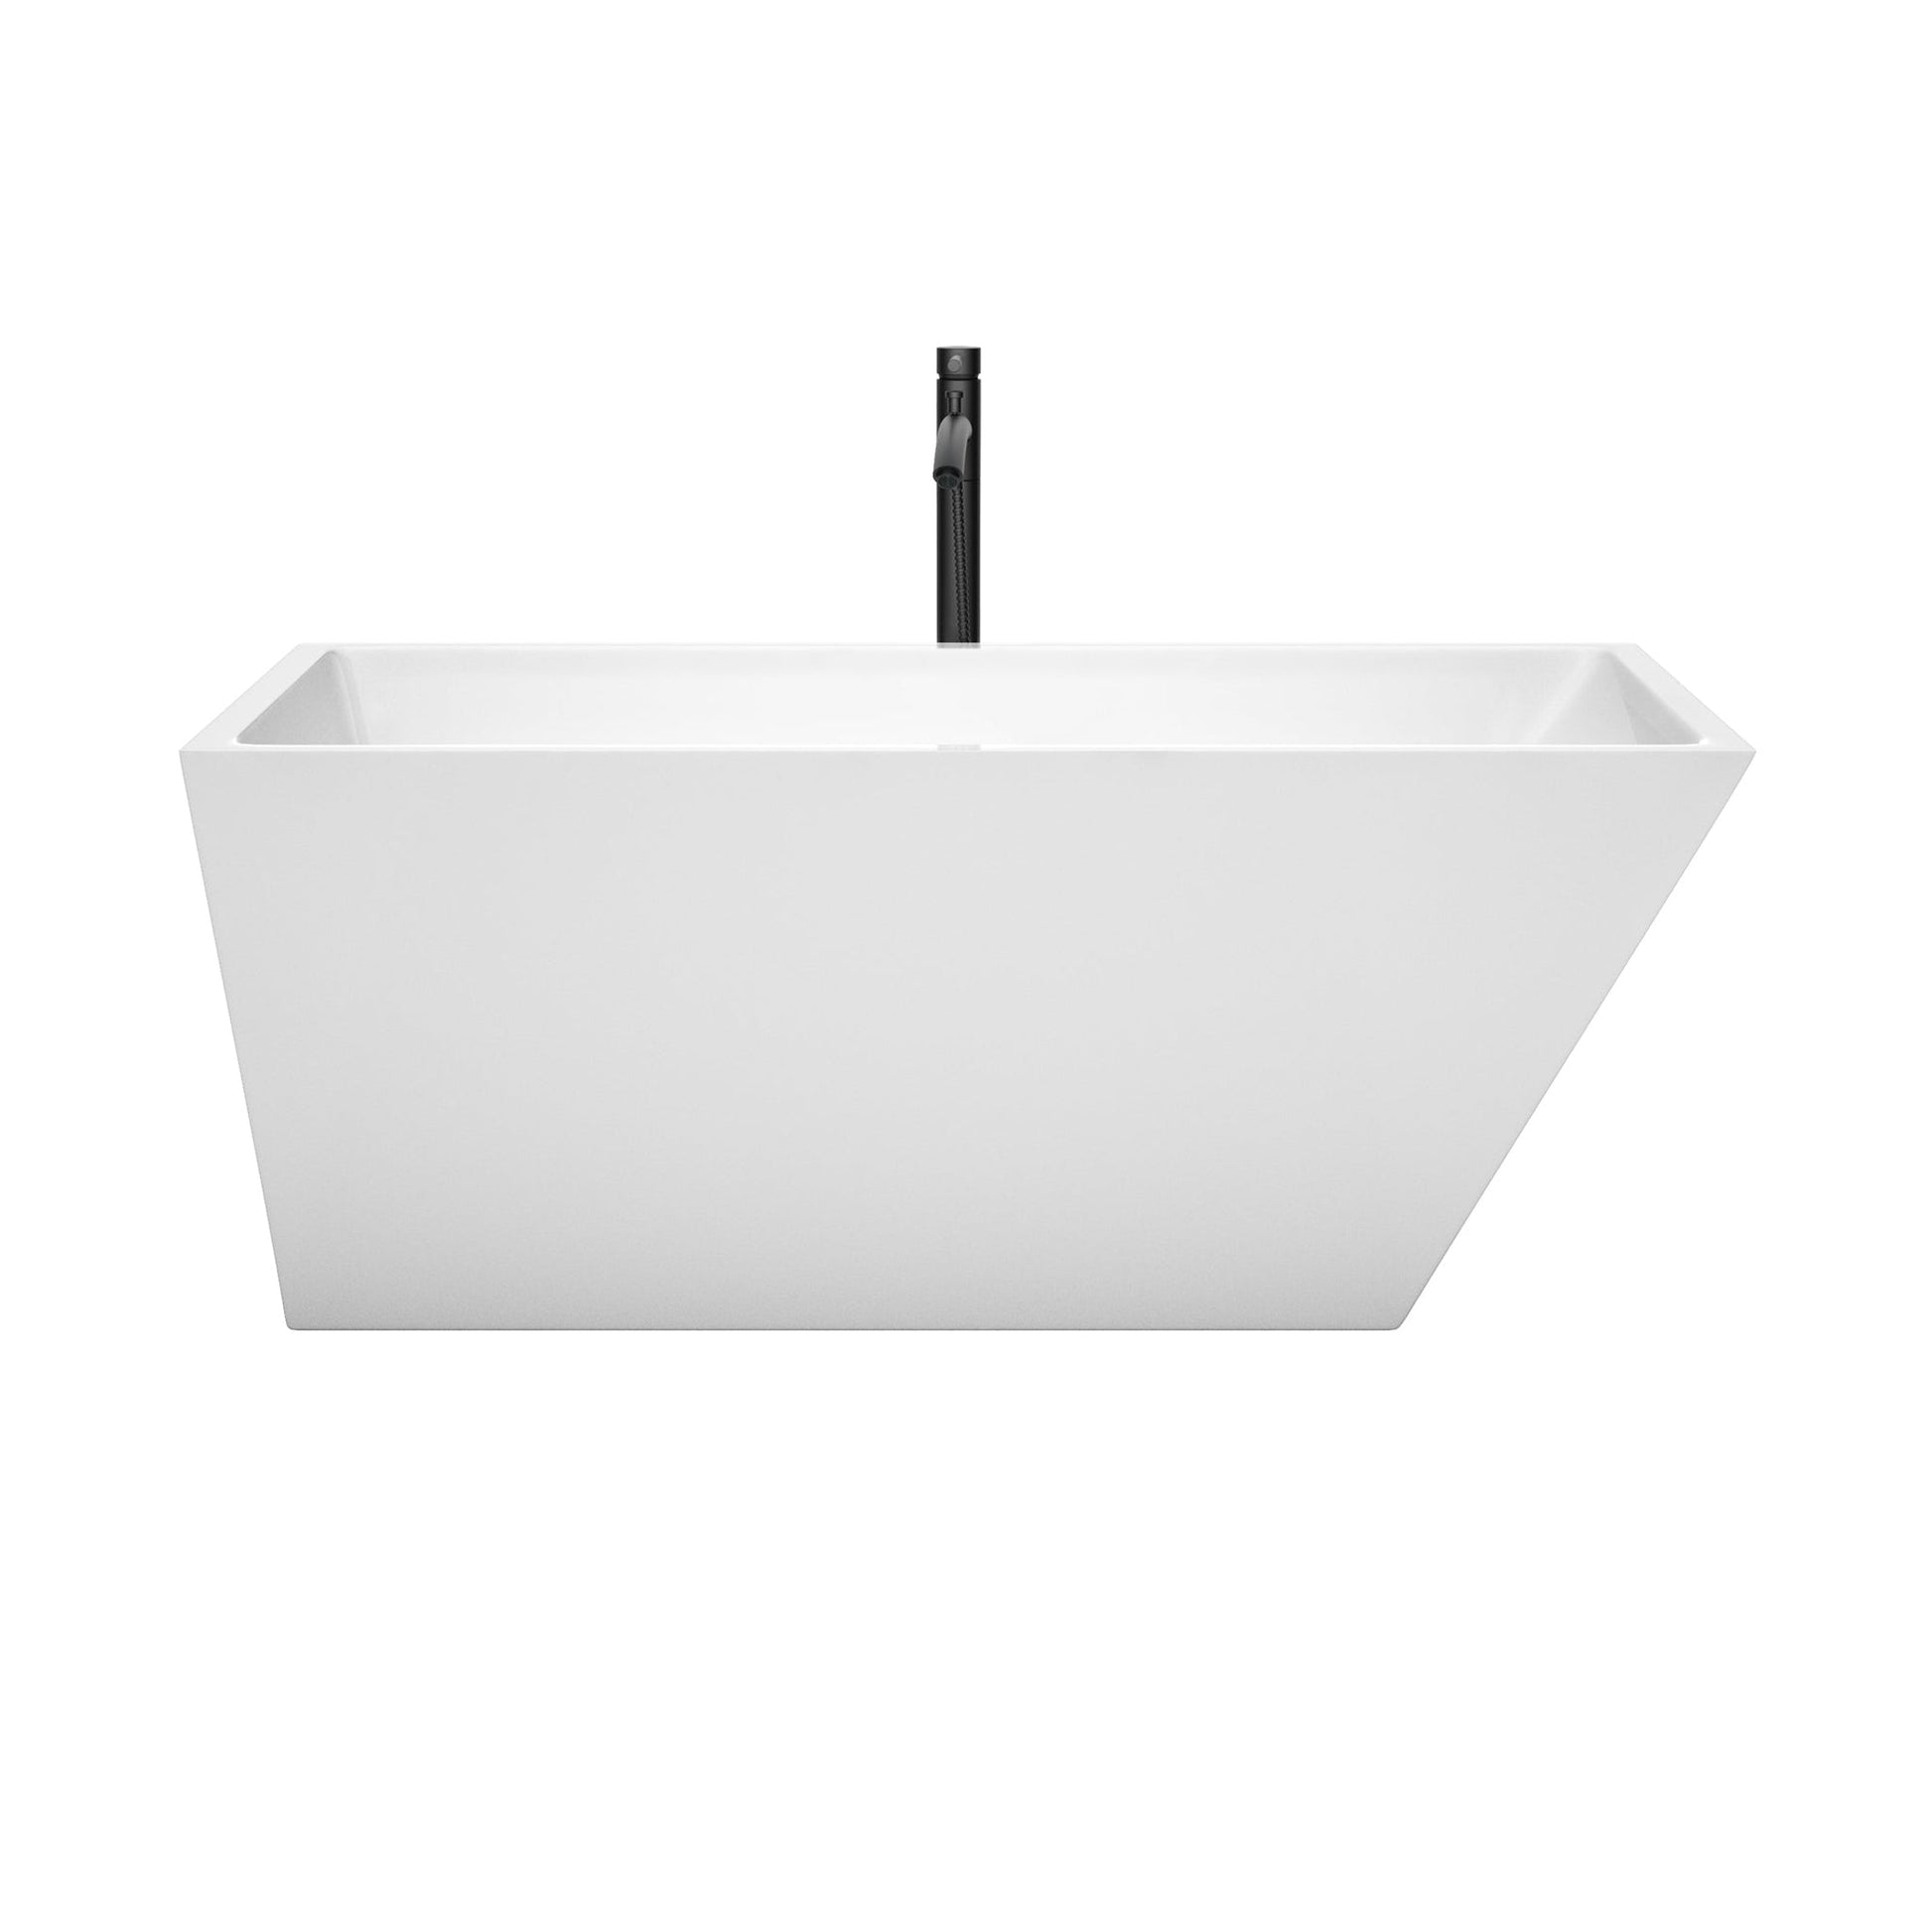 Wyndham Collection Hannah 59" Freestanding Bathtub in White With Polished Chrome Trim and Floor Mounted Faucet in Matte Black